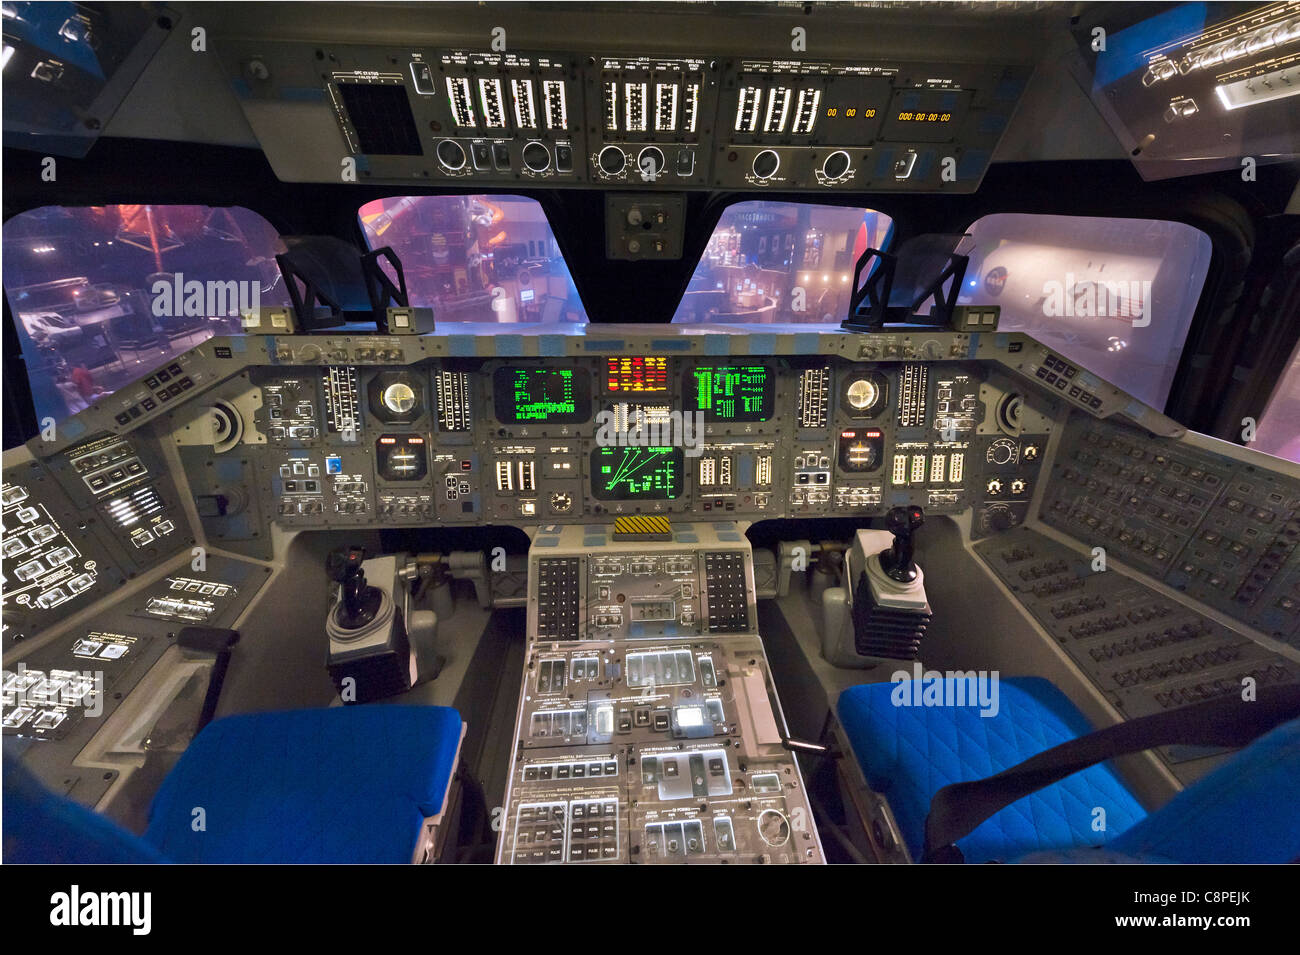 Mock up of the flight deck of the Space Shuttle Orbiter Vehicle, Houston Space Center museum, Houston, Texas, USA Stock Photo